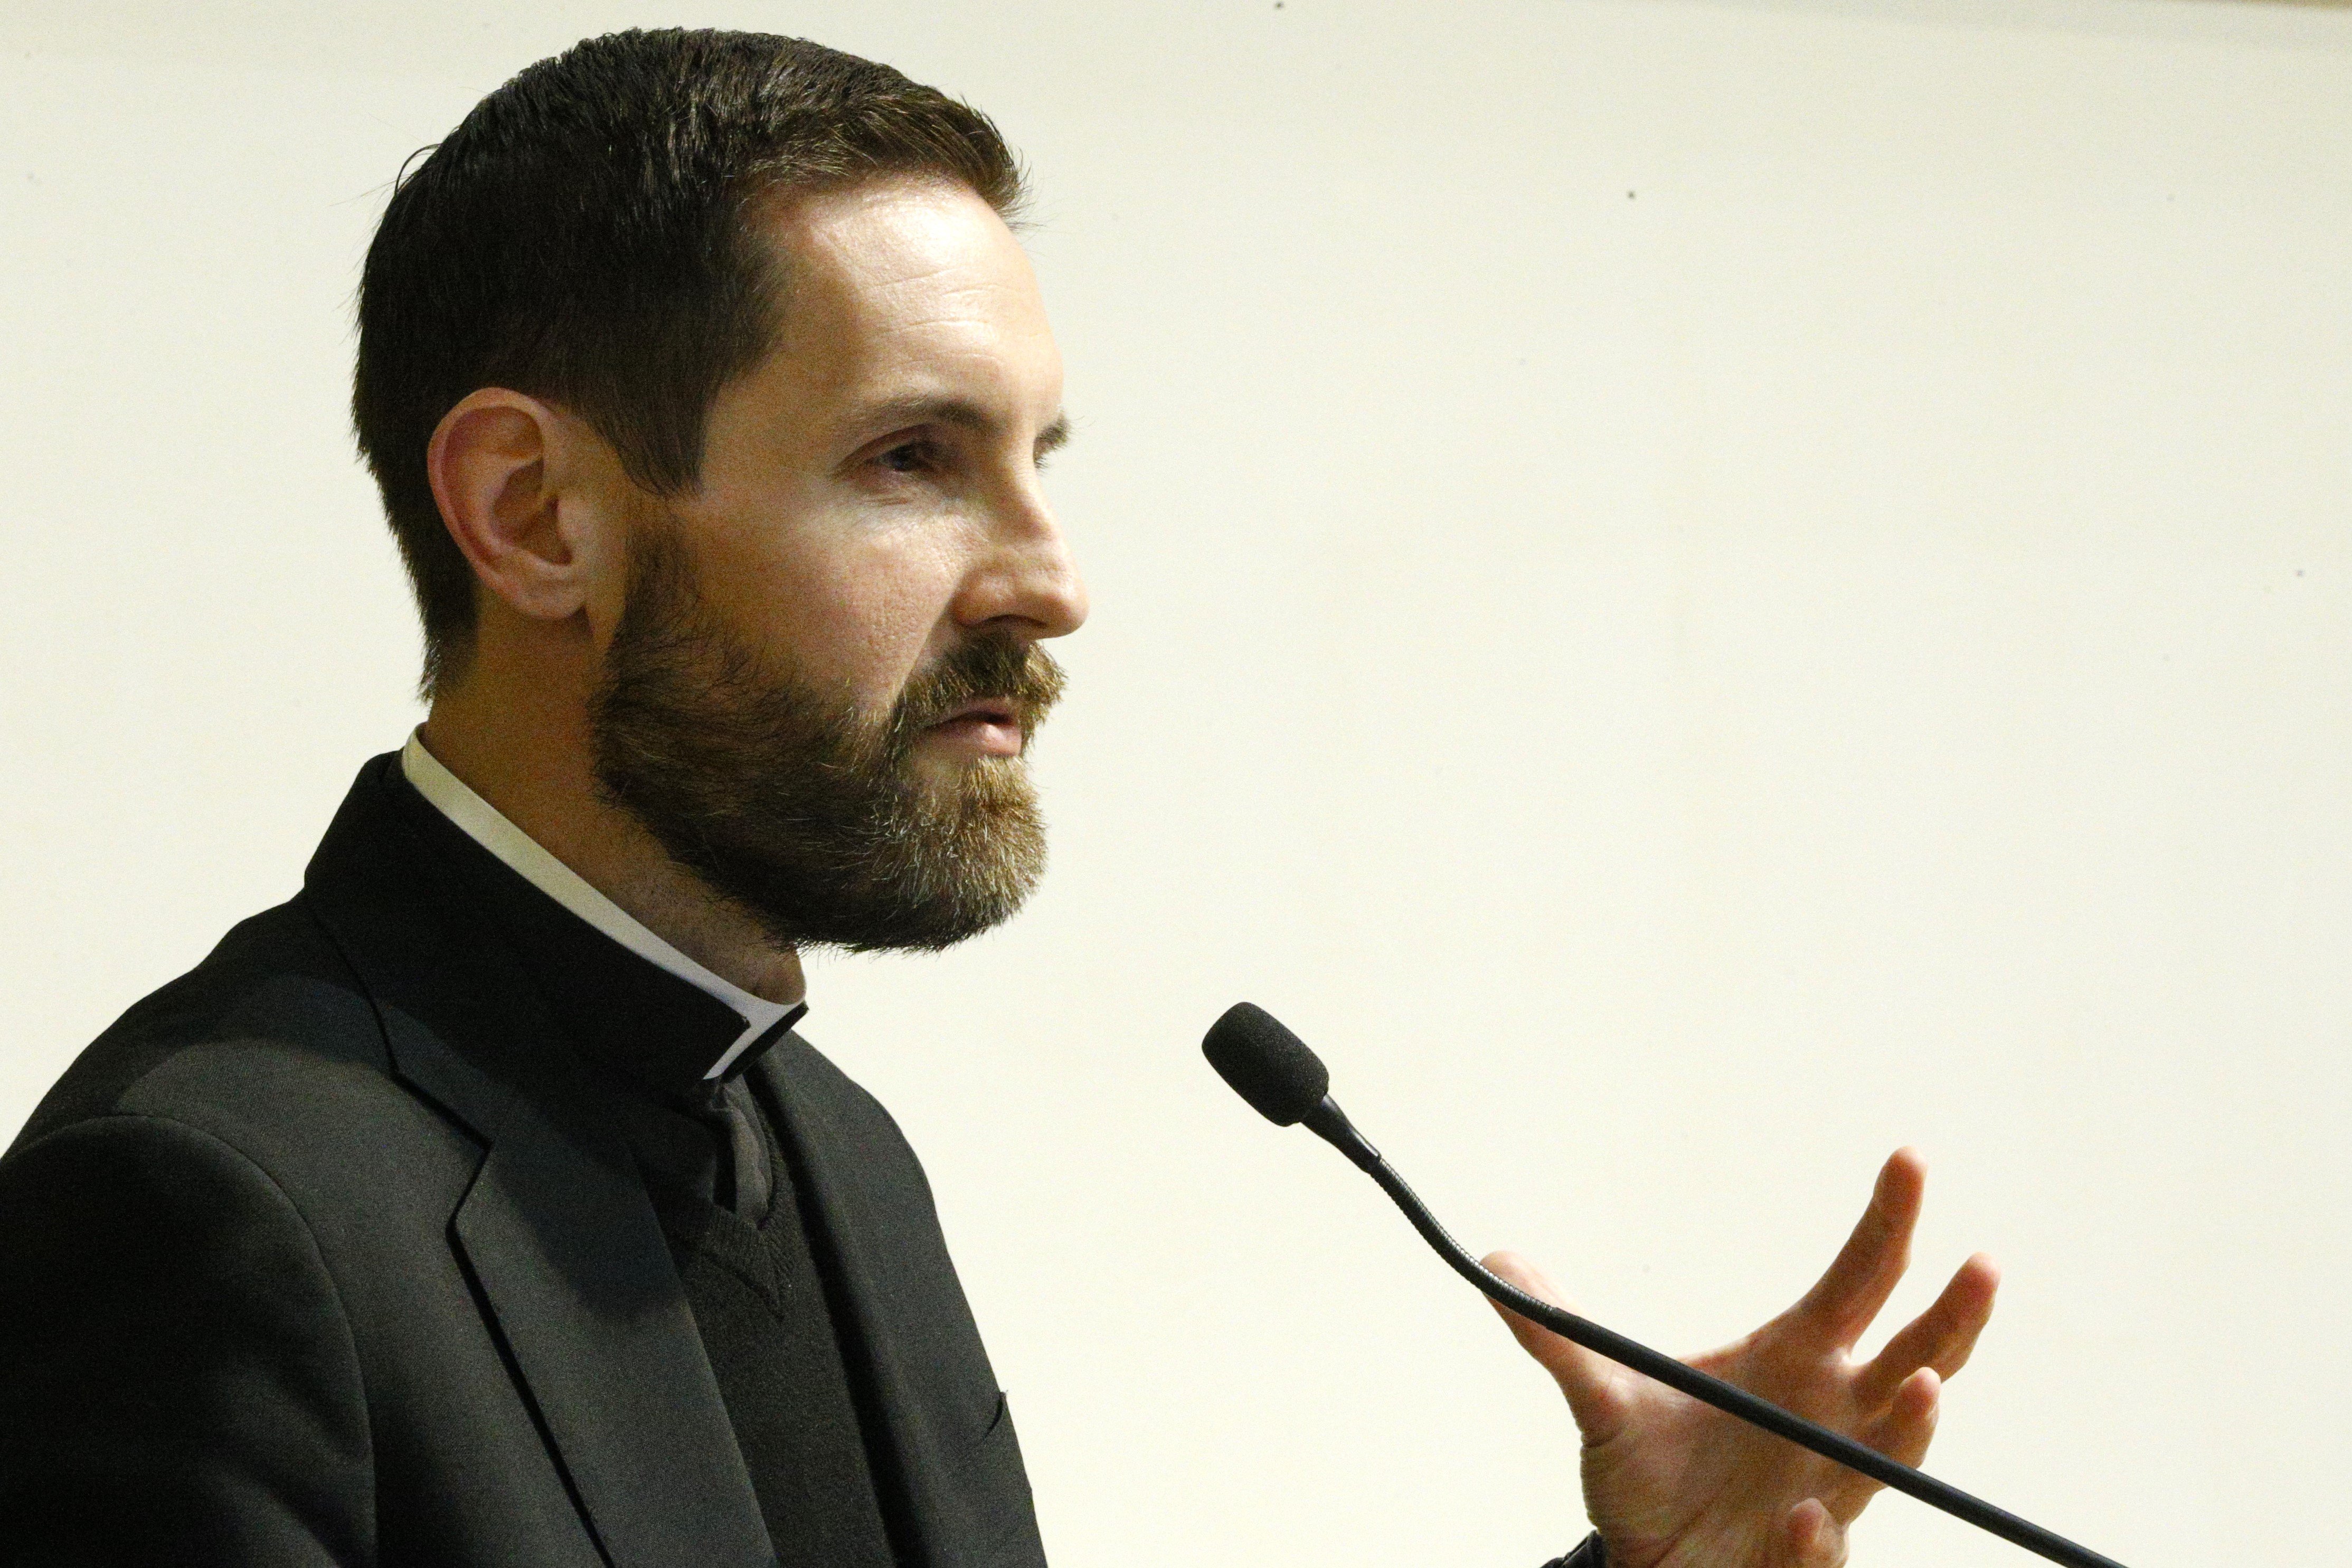 Legionary of Christ Father Michael Baggot speaks at a conference.